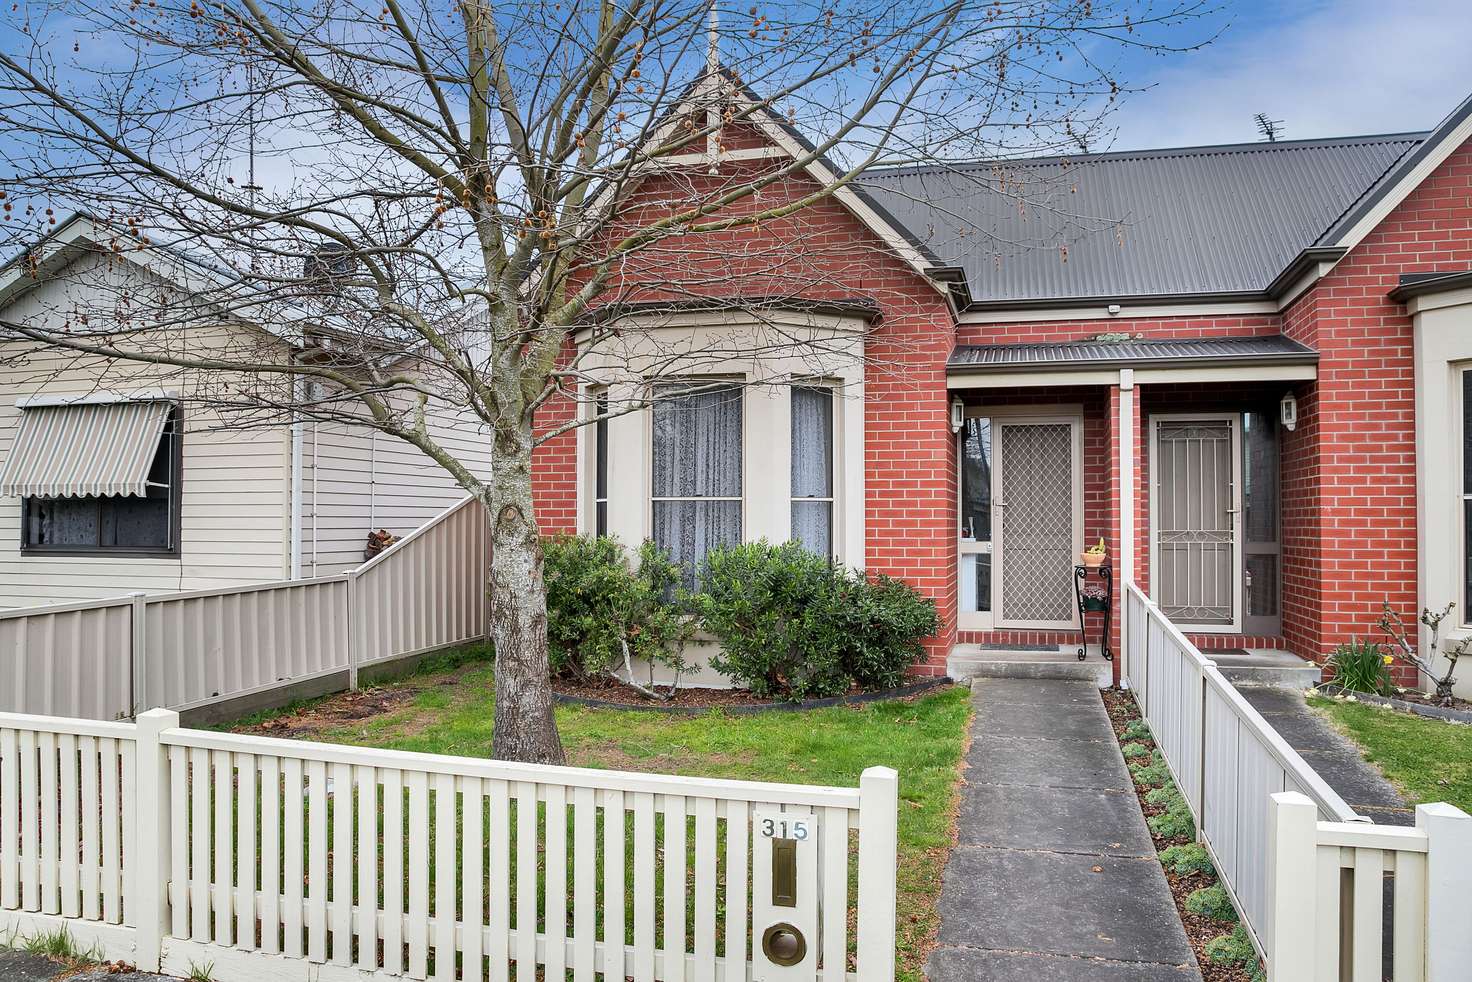 Main view of Homely house listing, 315 Ripon Street South, Ballarat Central VIC 3350